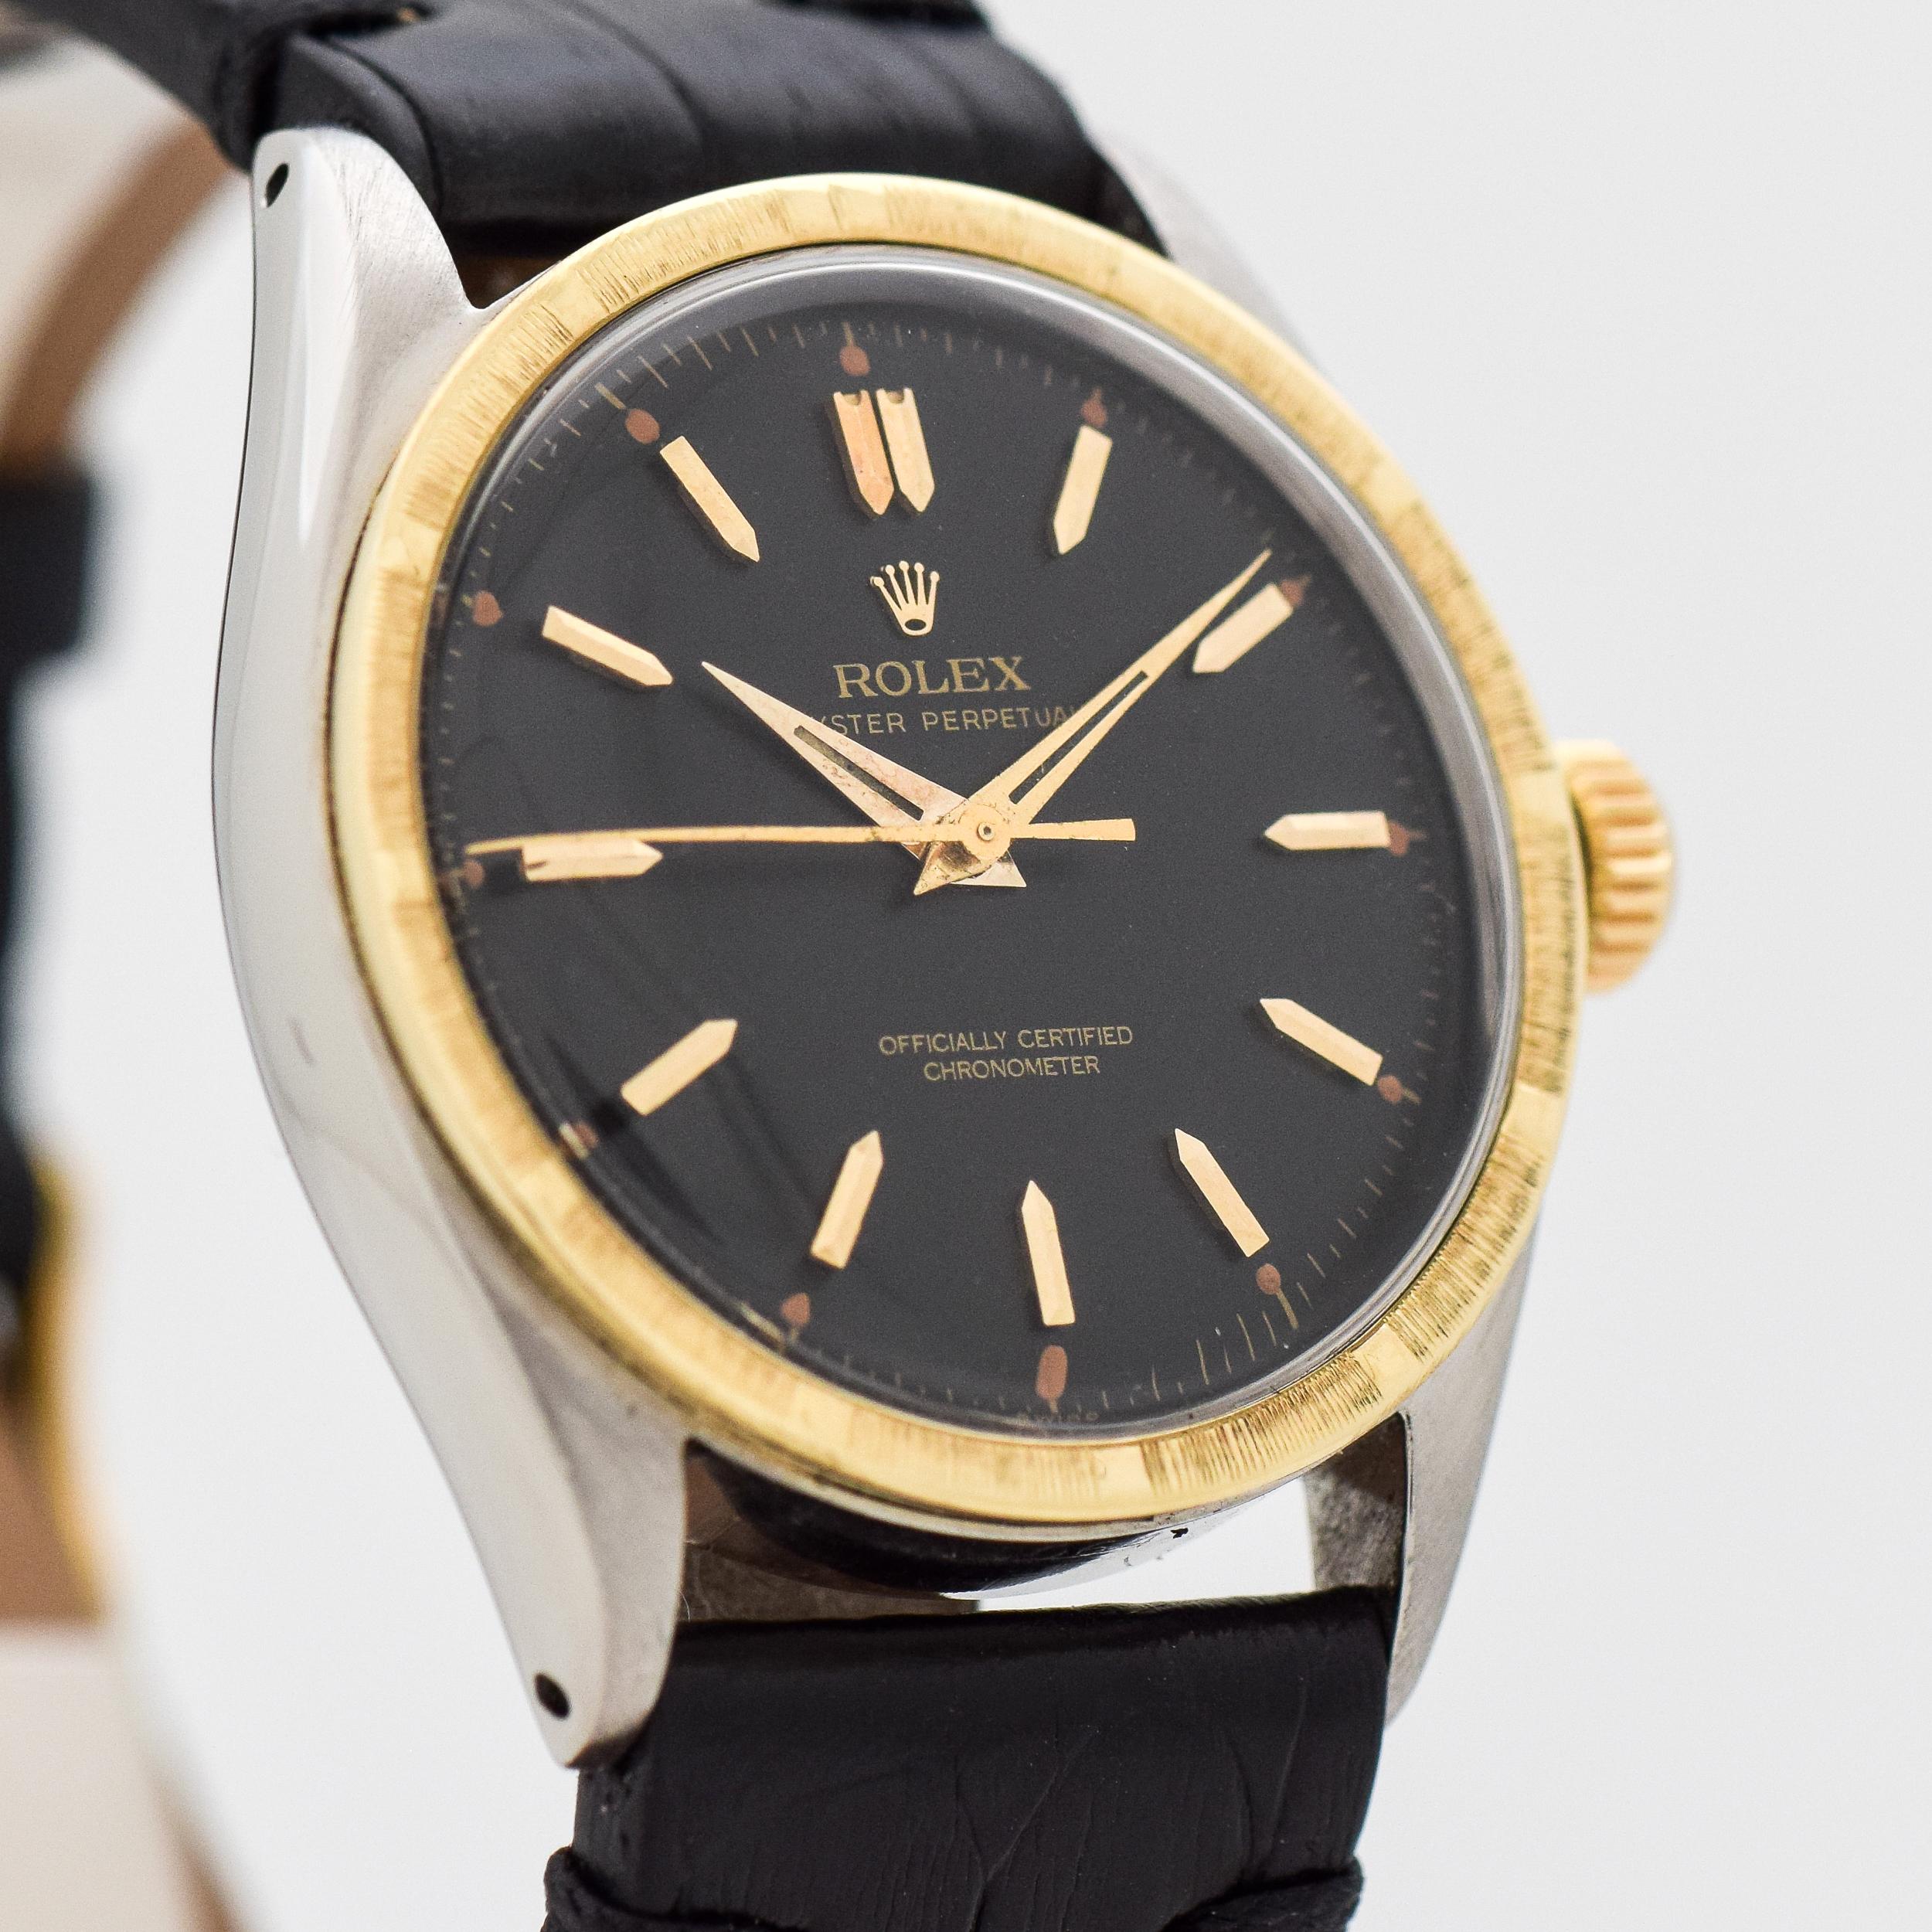 1953 Vintage Rolex Oyster Perpetual Two Tone 14k Yellow Gold Machined Bezel and Stainless Steel watch with Black Dial with Applied Gold Beveled Elongated Pointed Stick/Bar/Baton Markers. 34mm x 38mm lug to lug (1.34 in. x 1.5 in.) - 18 jewel,